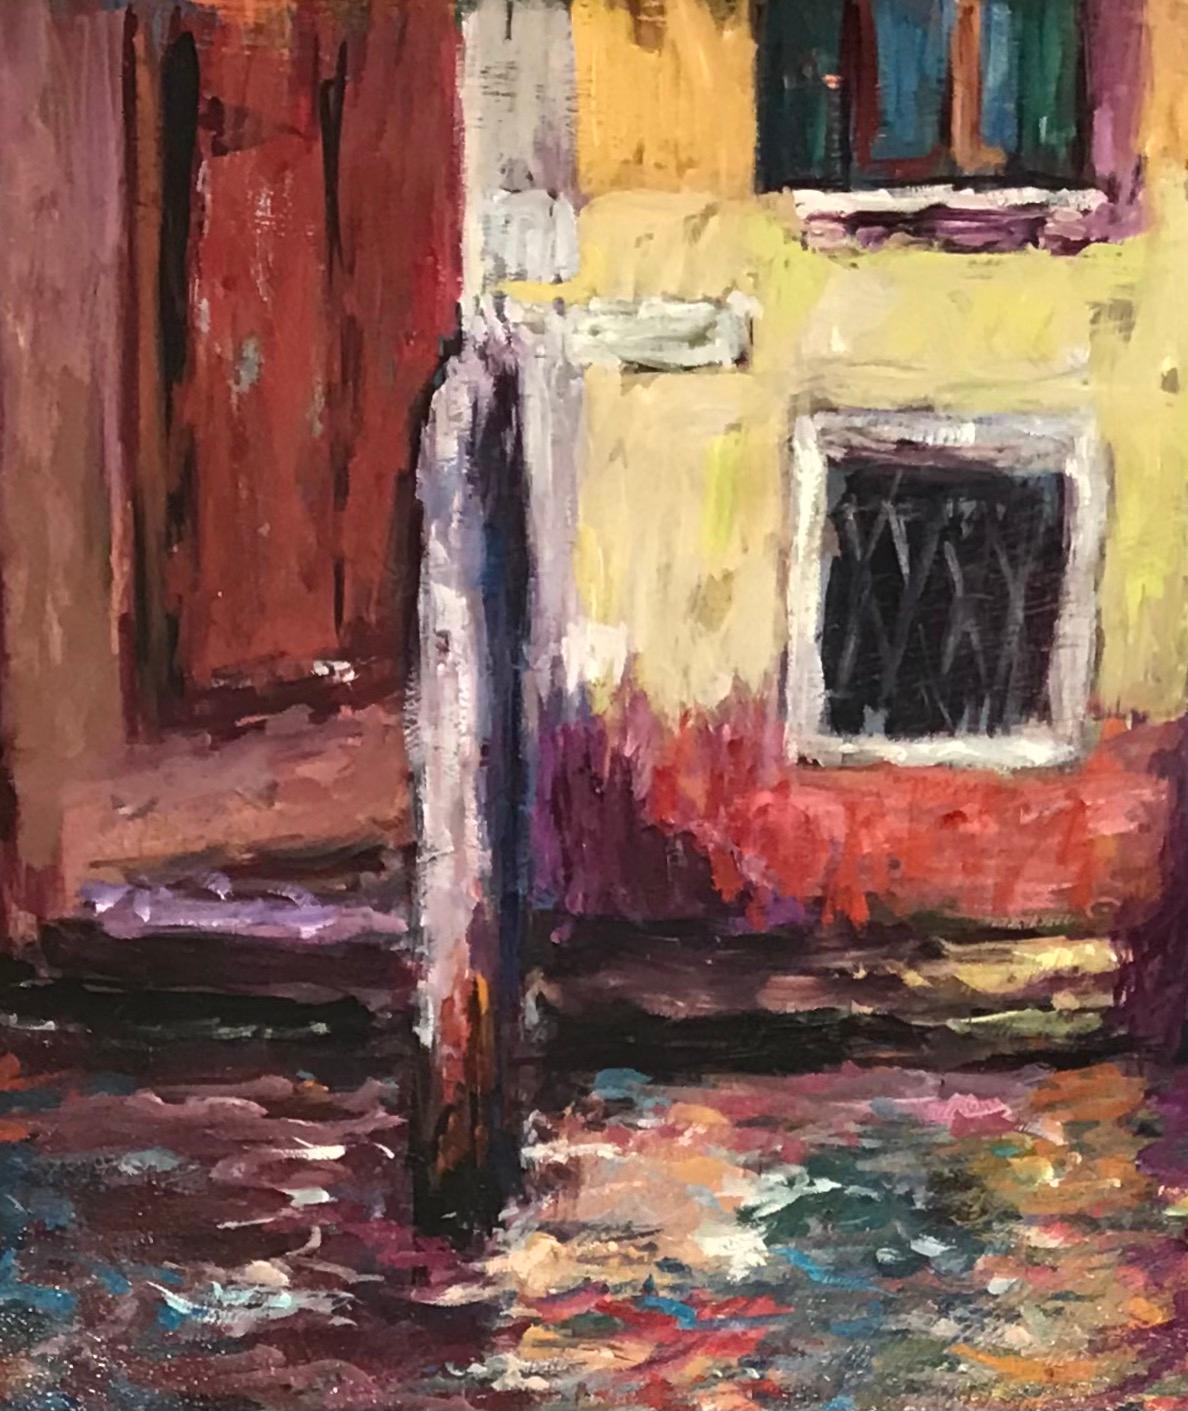 Painter, Comtesse began his exhibitions in 1964. After having obtained the Federal Fine Arts scholarship twice, he traveled to France, Italy and India. He regularly presents his works in several Swiss cities and abroad. Director of the Maximilien de